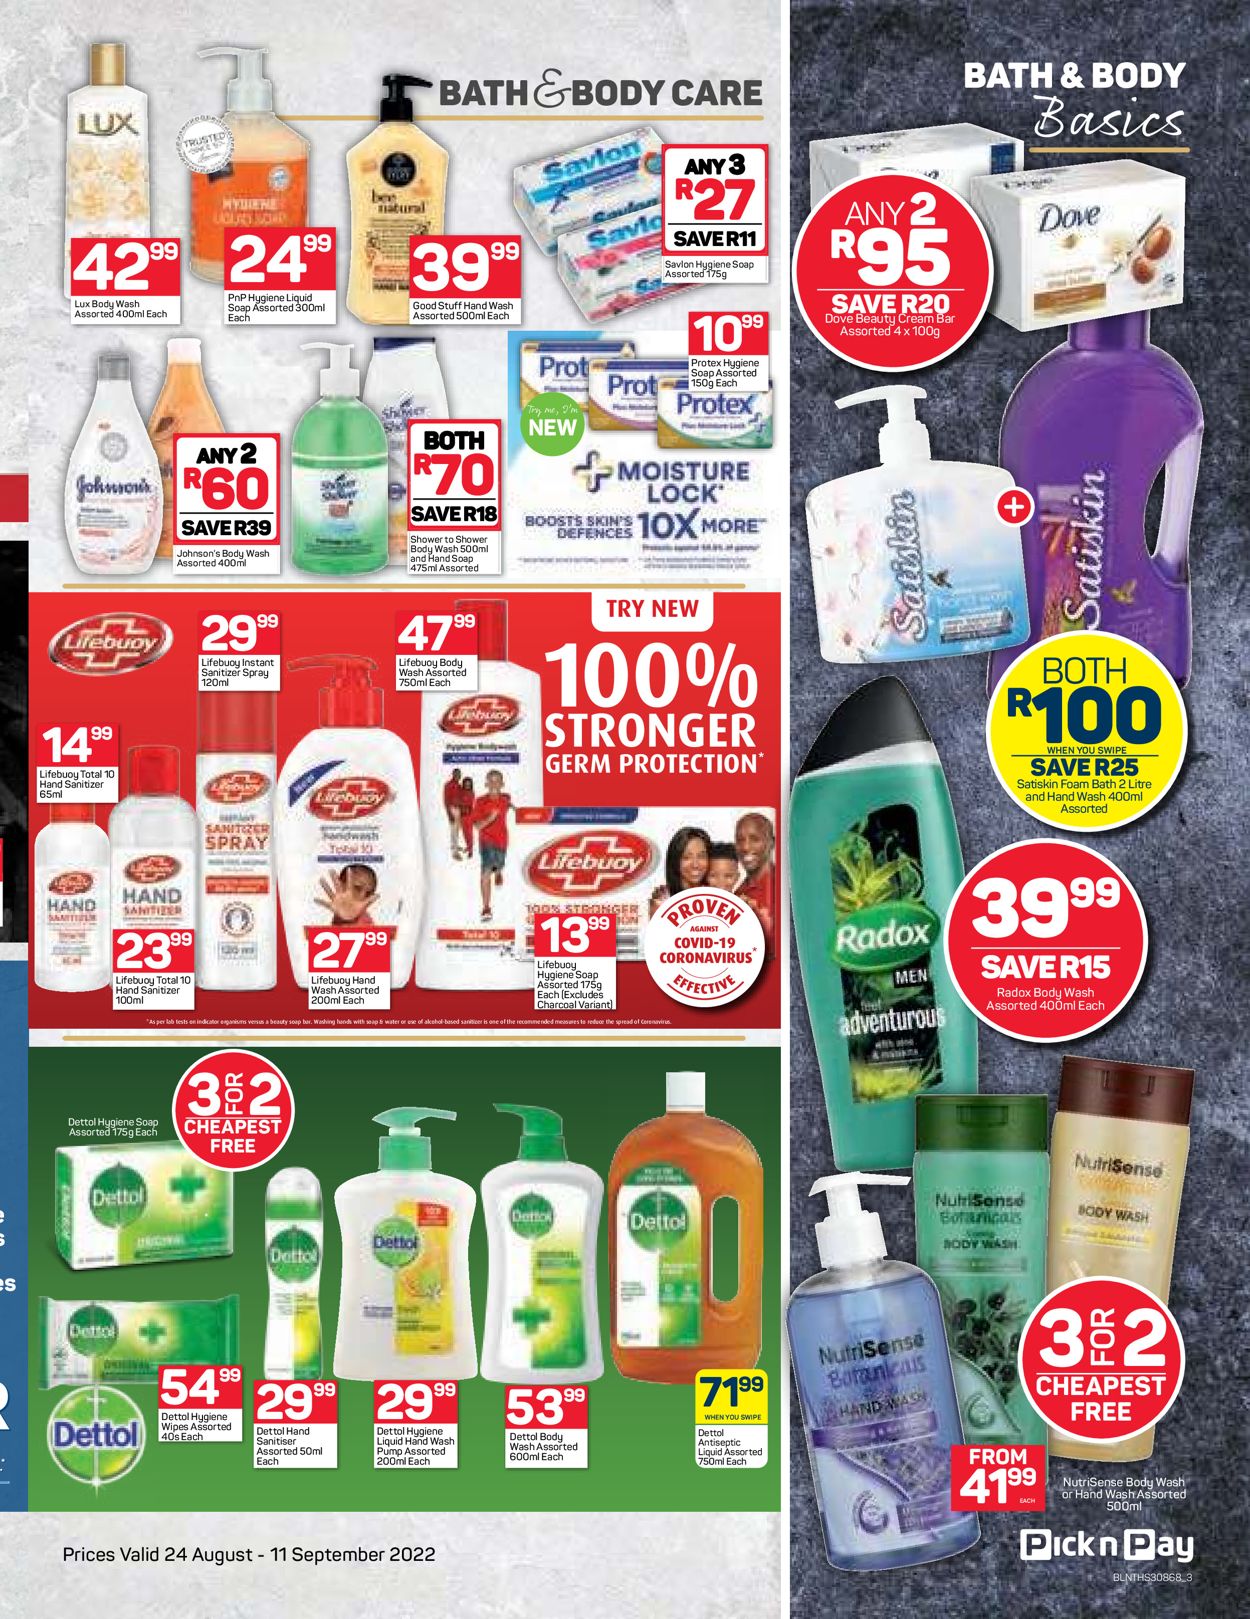 Pick n Pay Catalogue - 2022/08/24-2022/09/11 (Page 3)